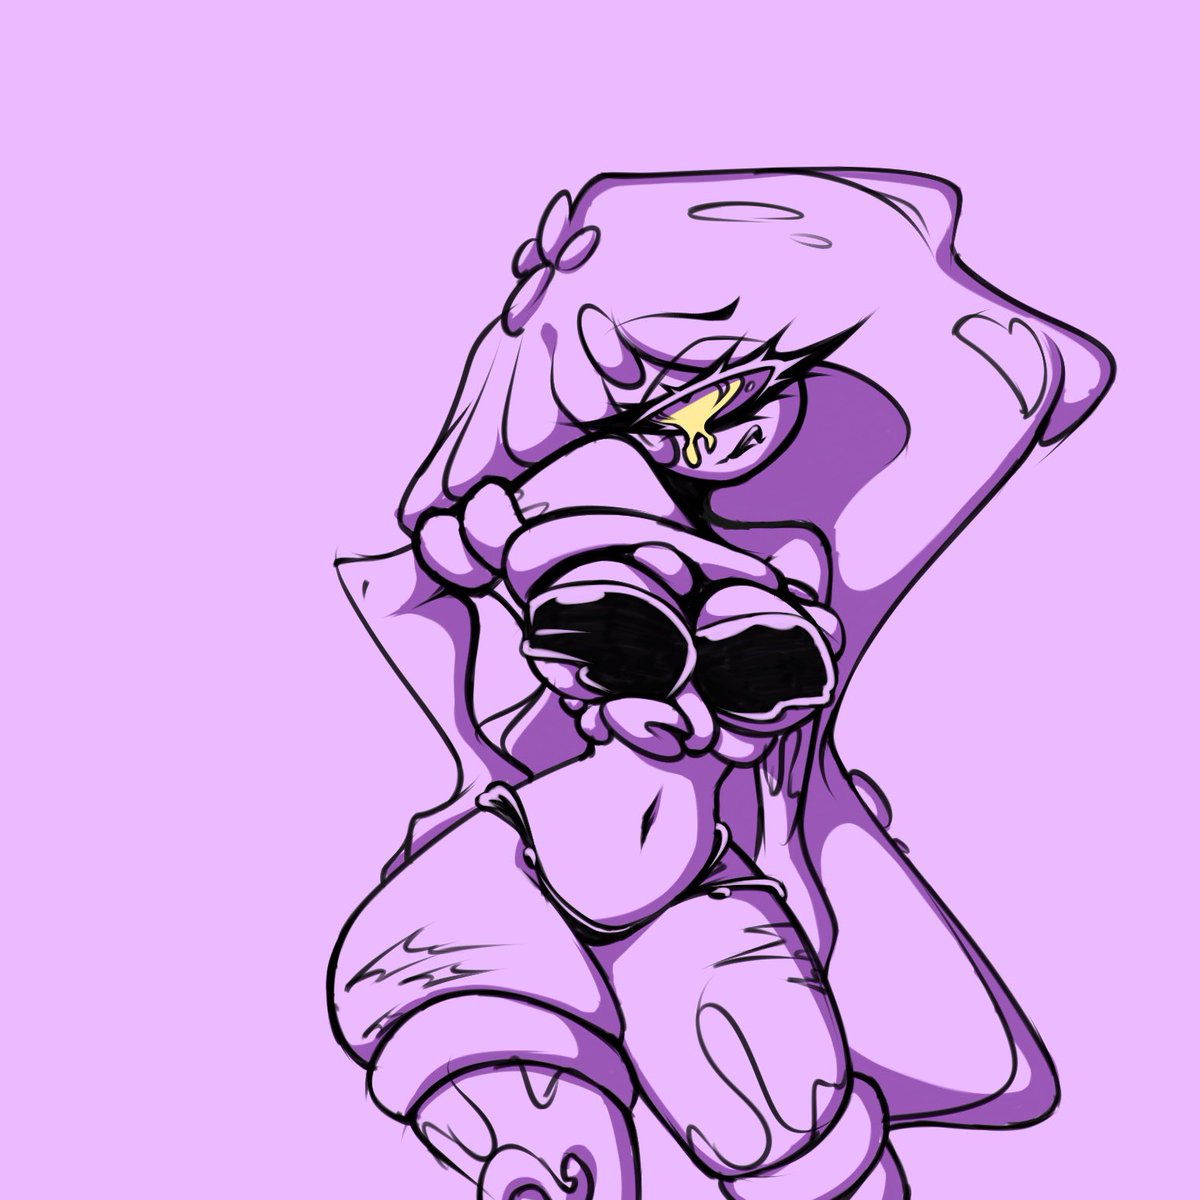 Been feelin’ a bit low so I did a quick Riot pinup.